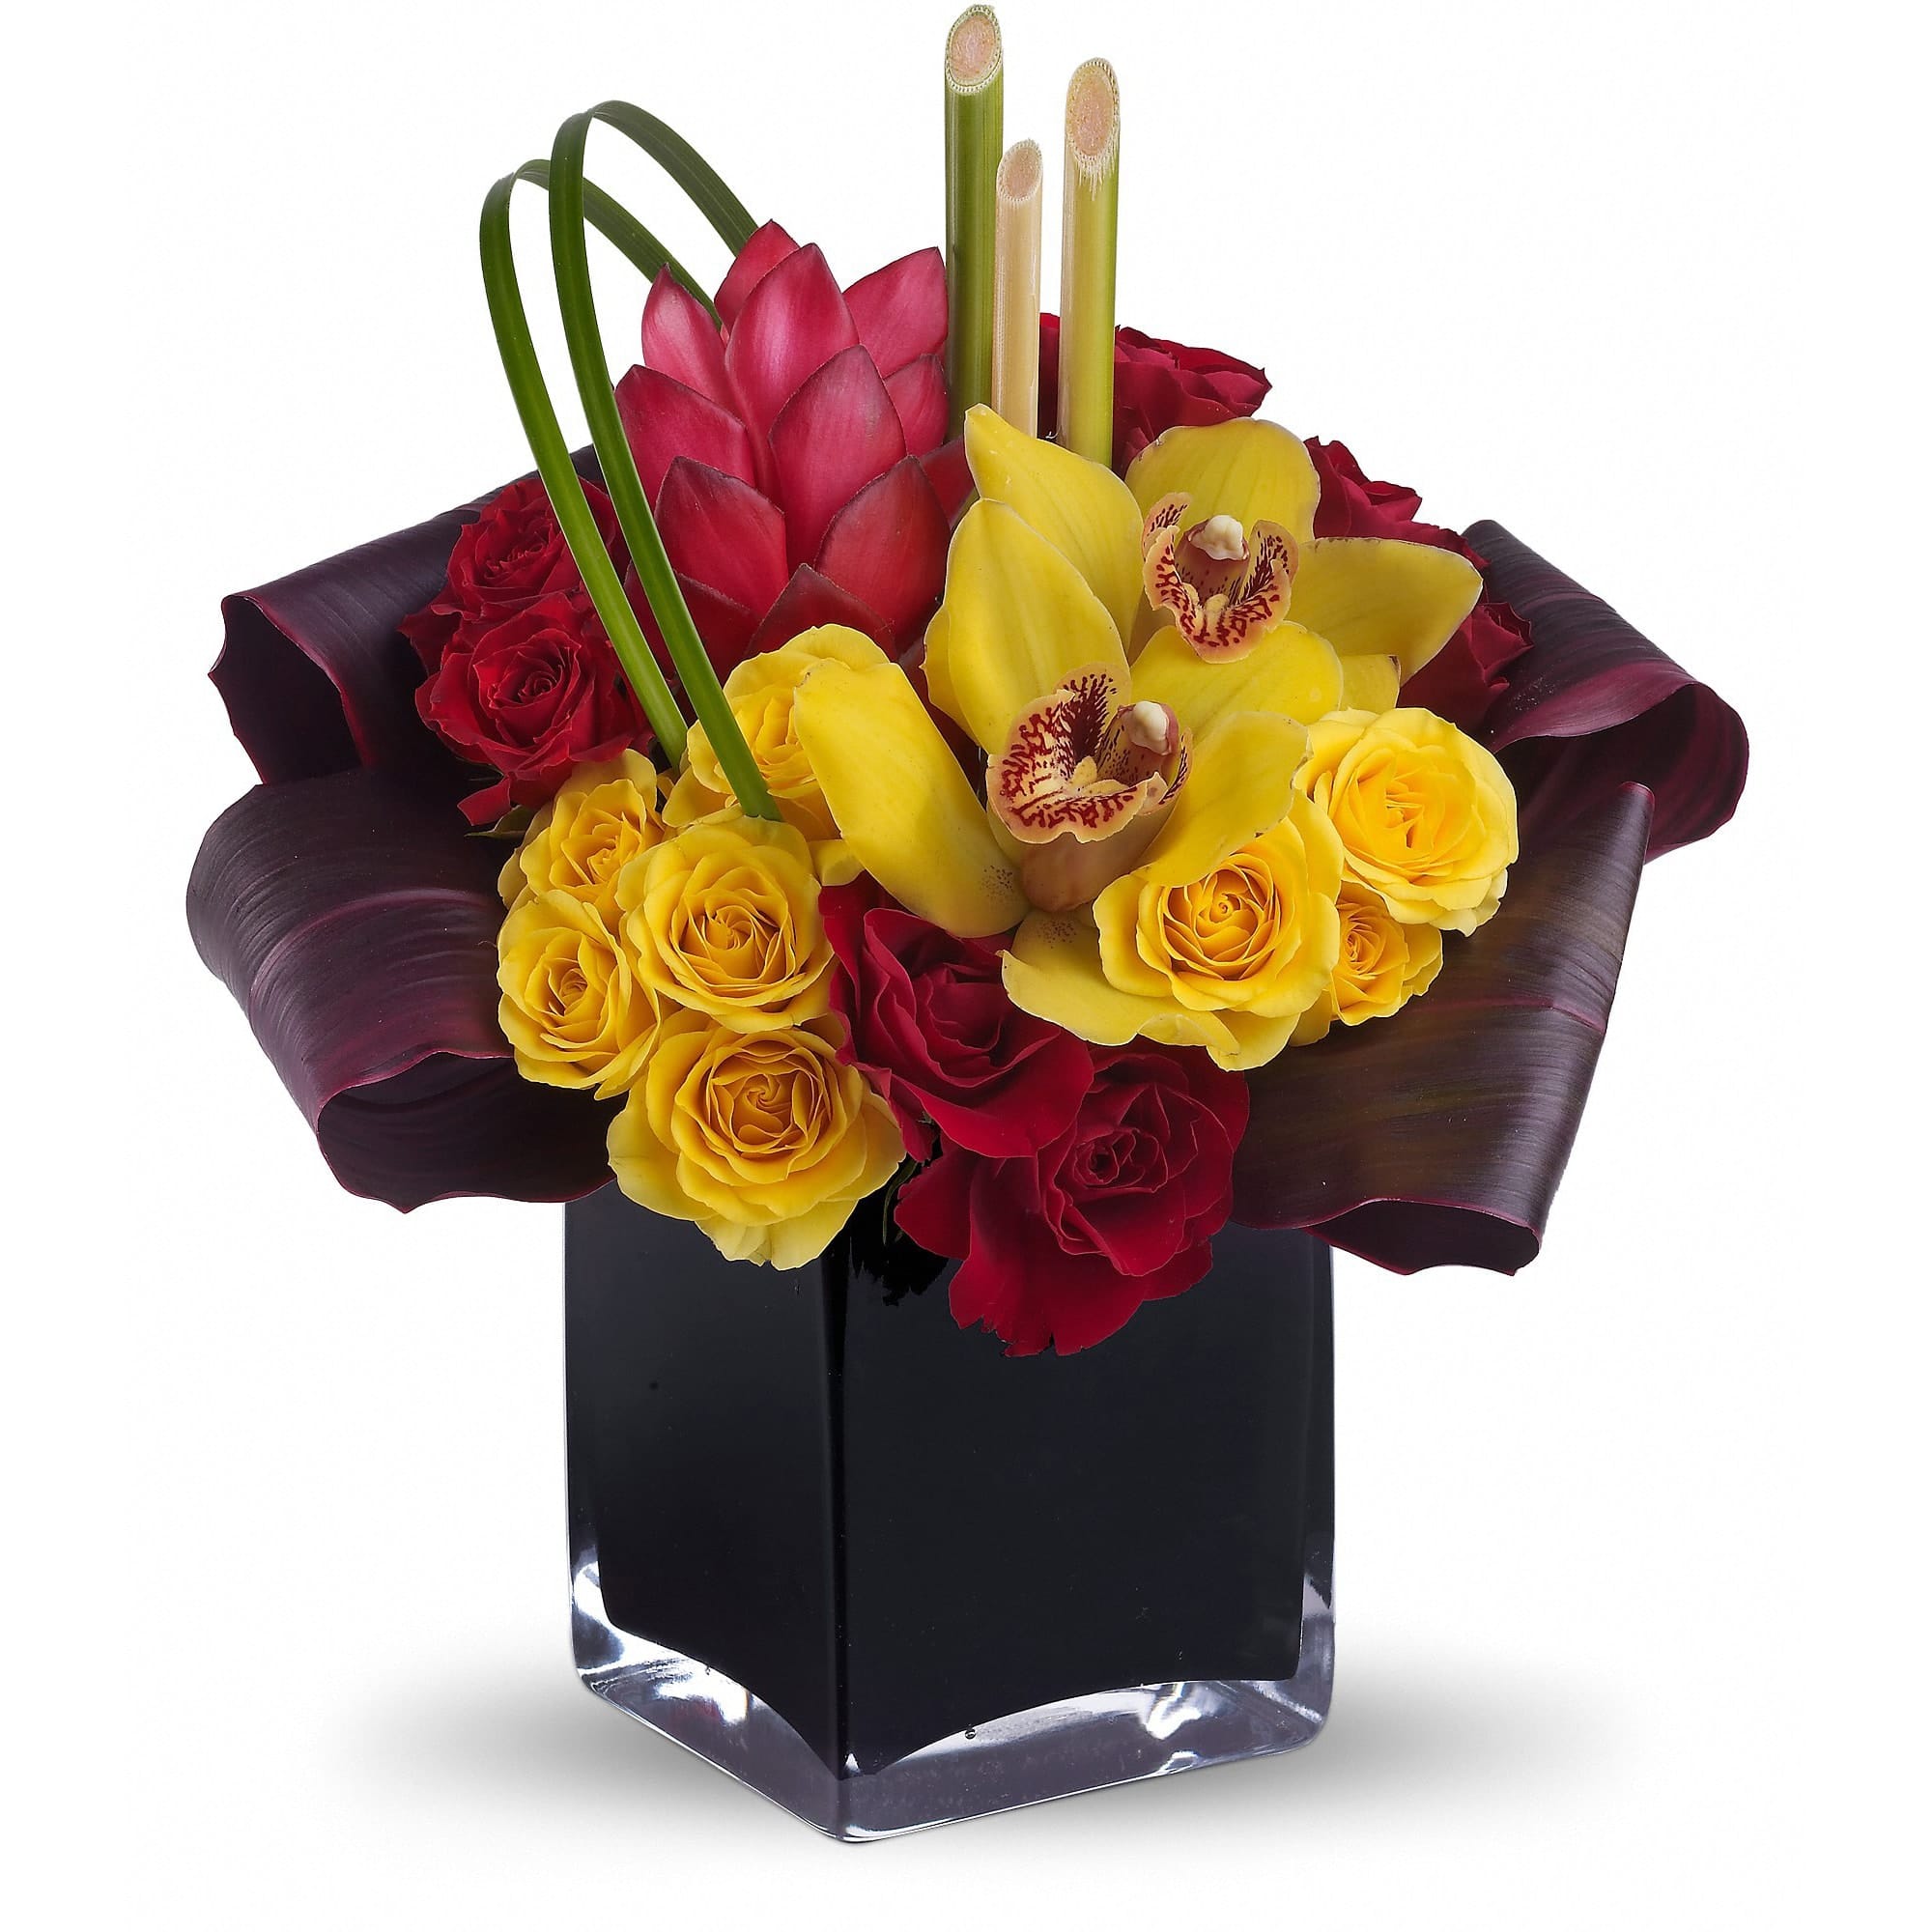 Yellow cymbidium orchids, red ginger, red and yellow spray roses